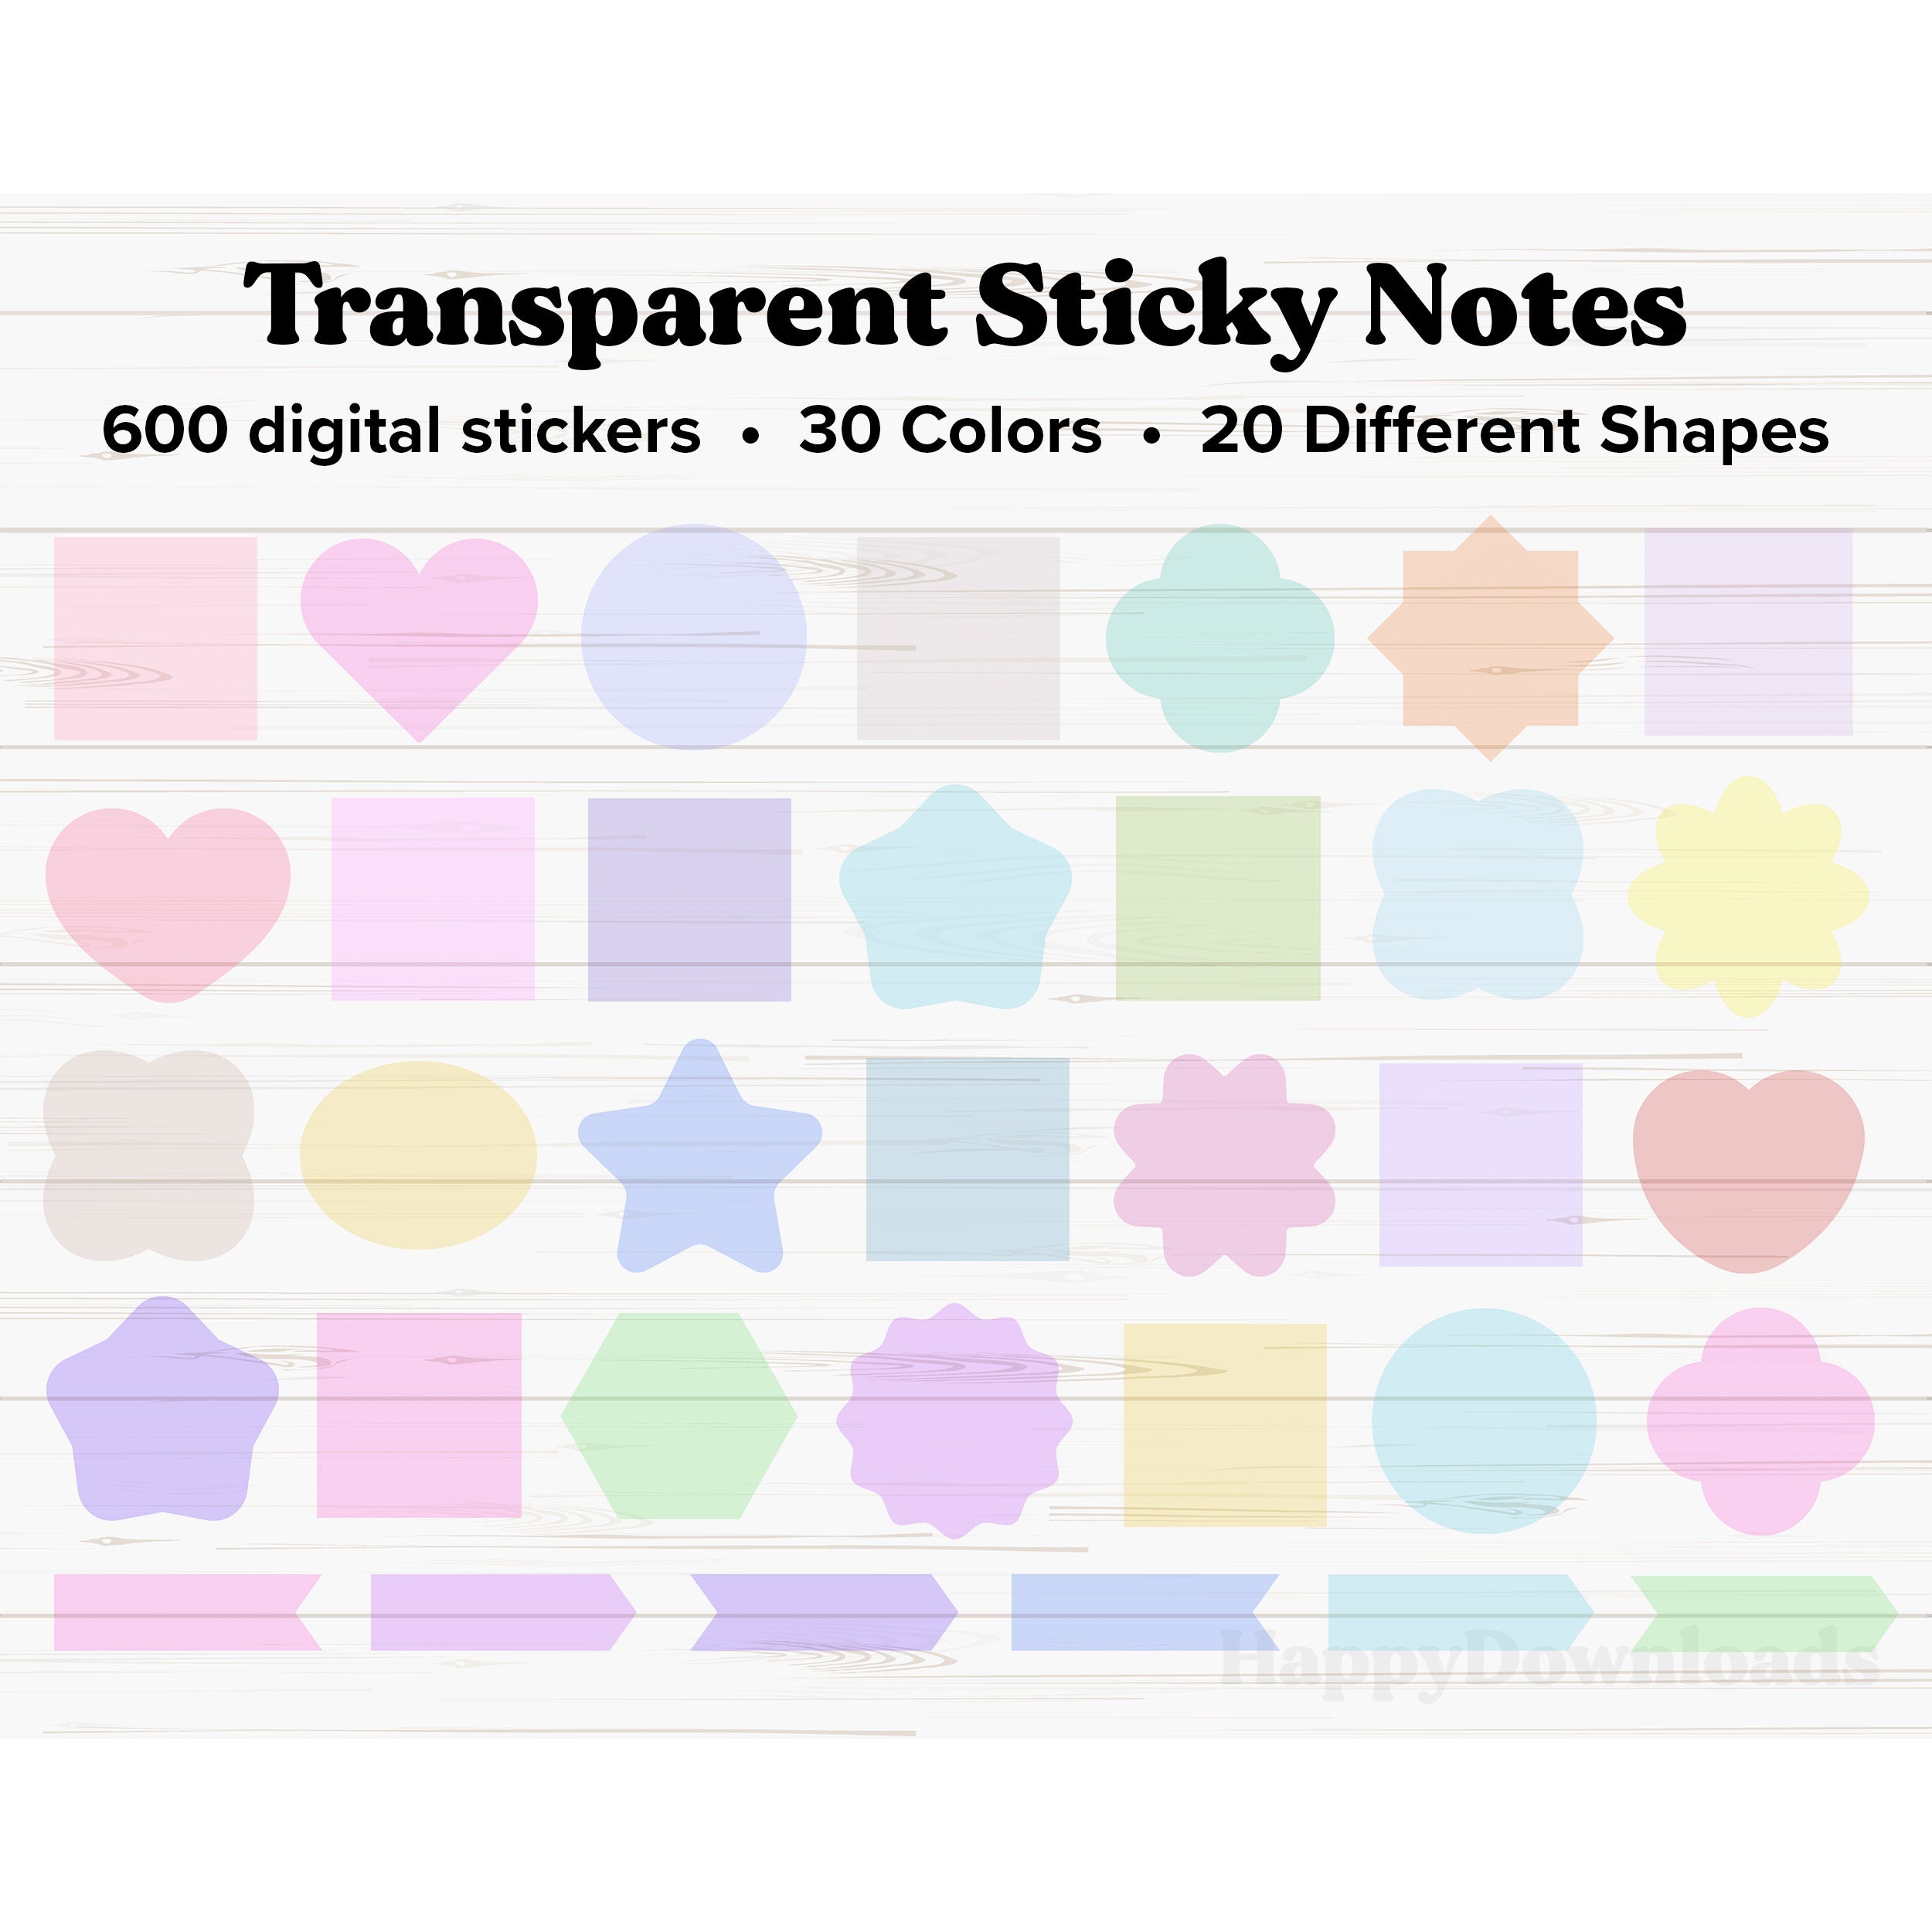 29 Post Its Sticky Note Shapes Digital Sticker Clipart Goodnotes